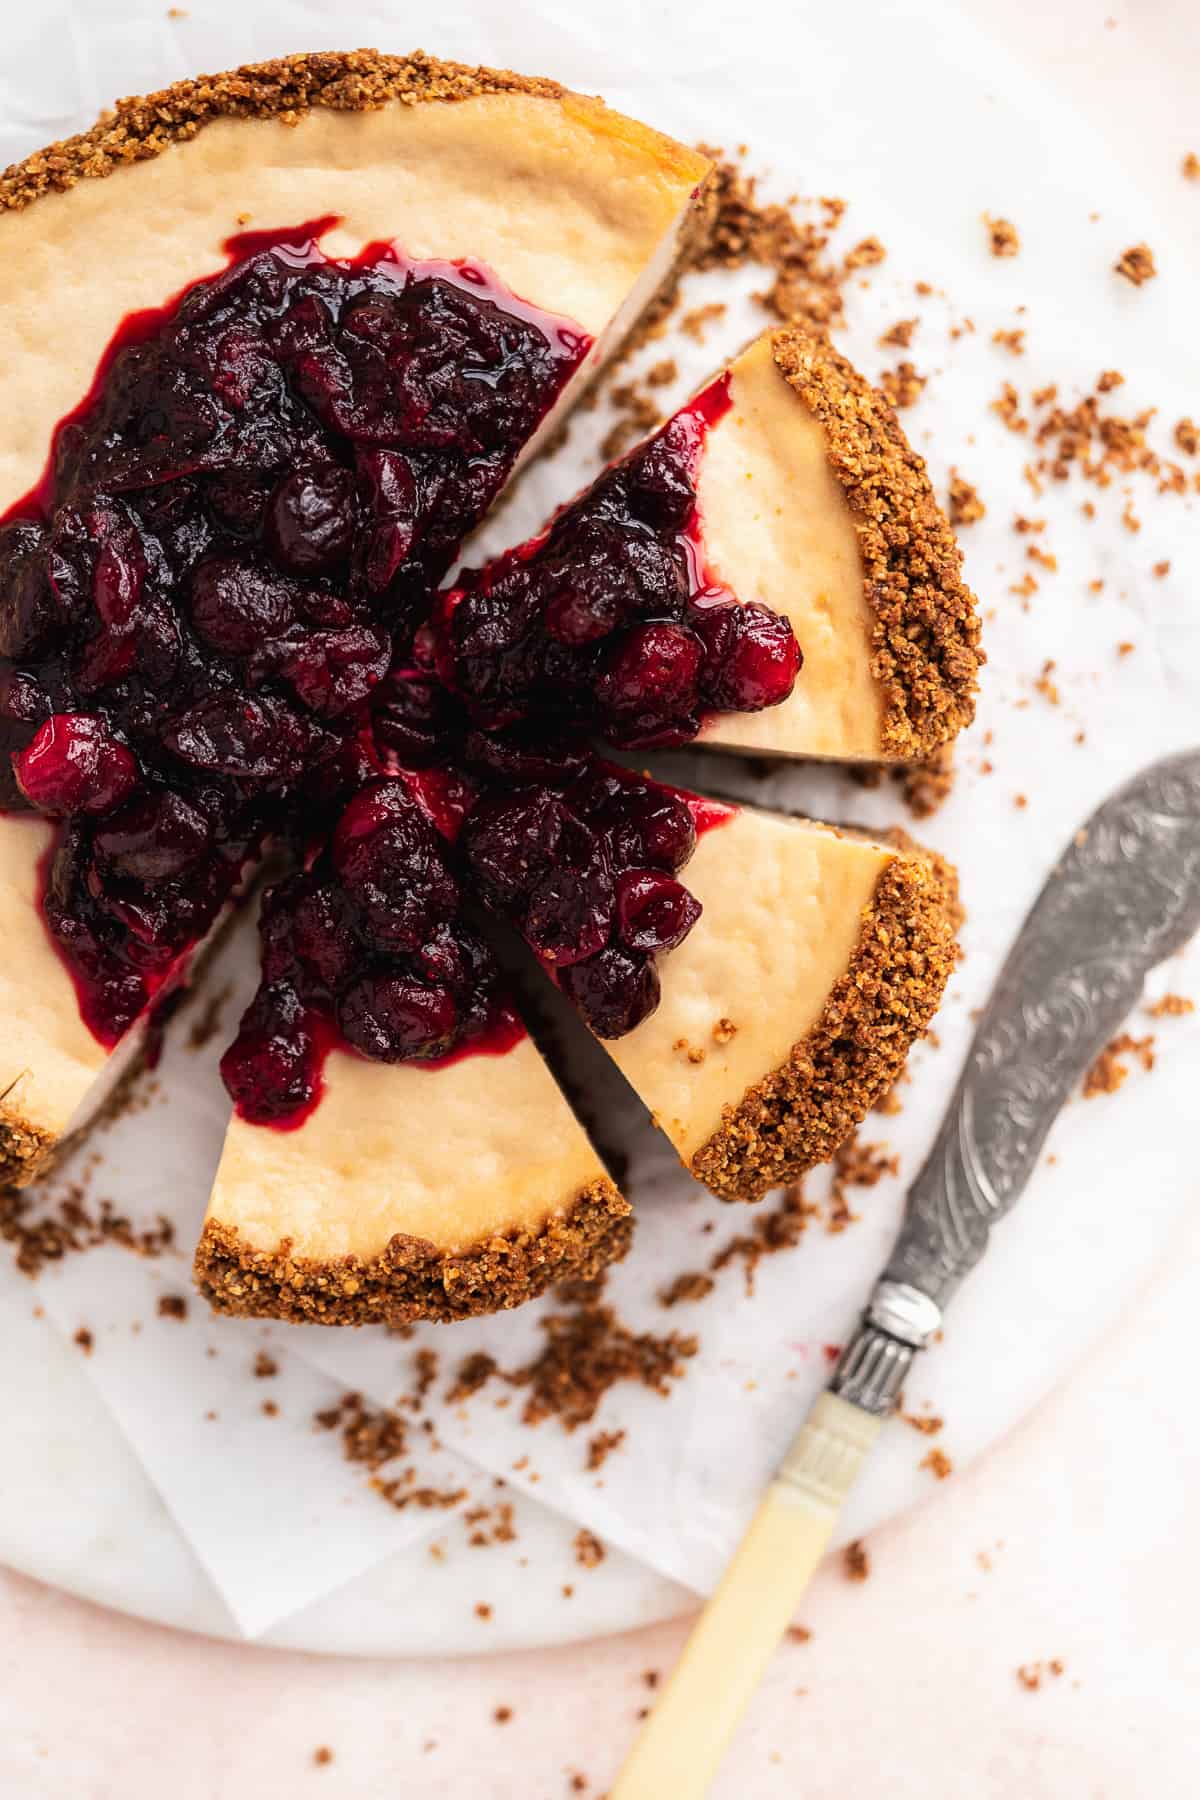 Overhead photo of the Vegan Baked Cranberry Cheesecake with Graham Cracker Crust with 3 slices cut and separated from the whole cake.  Silver pearl handled knife lays nearby.  